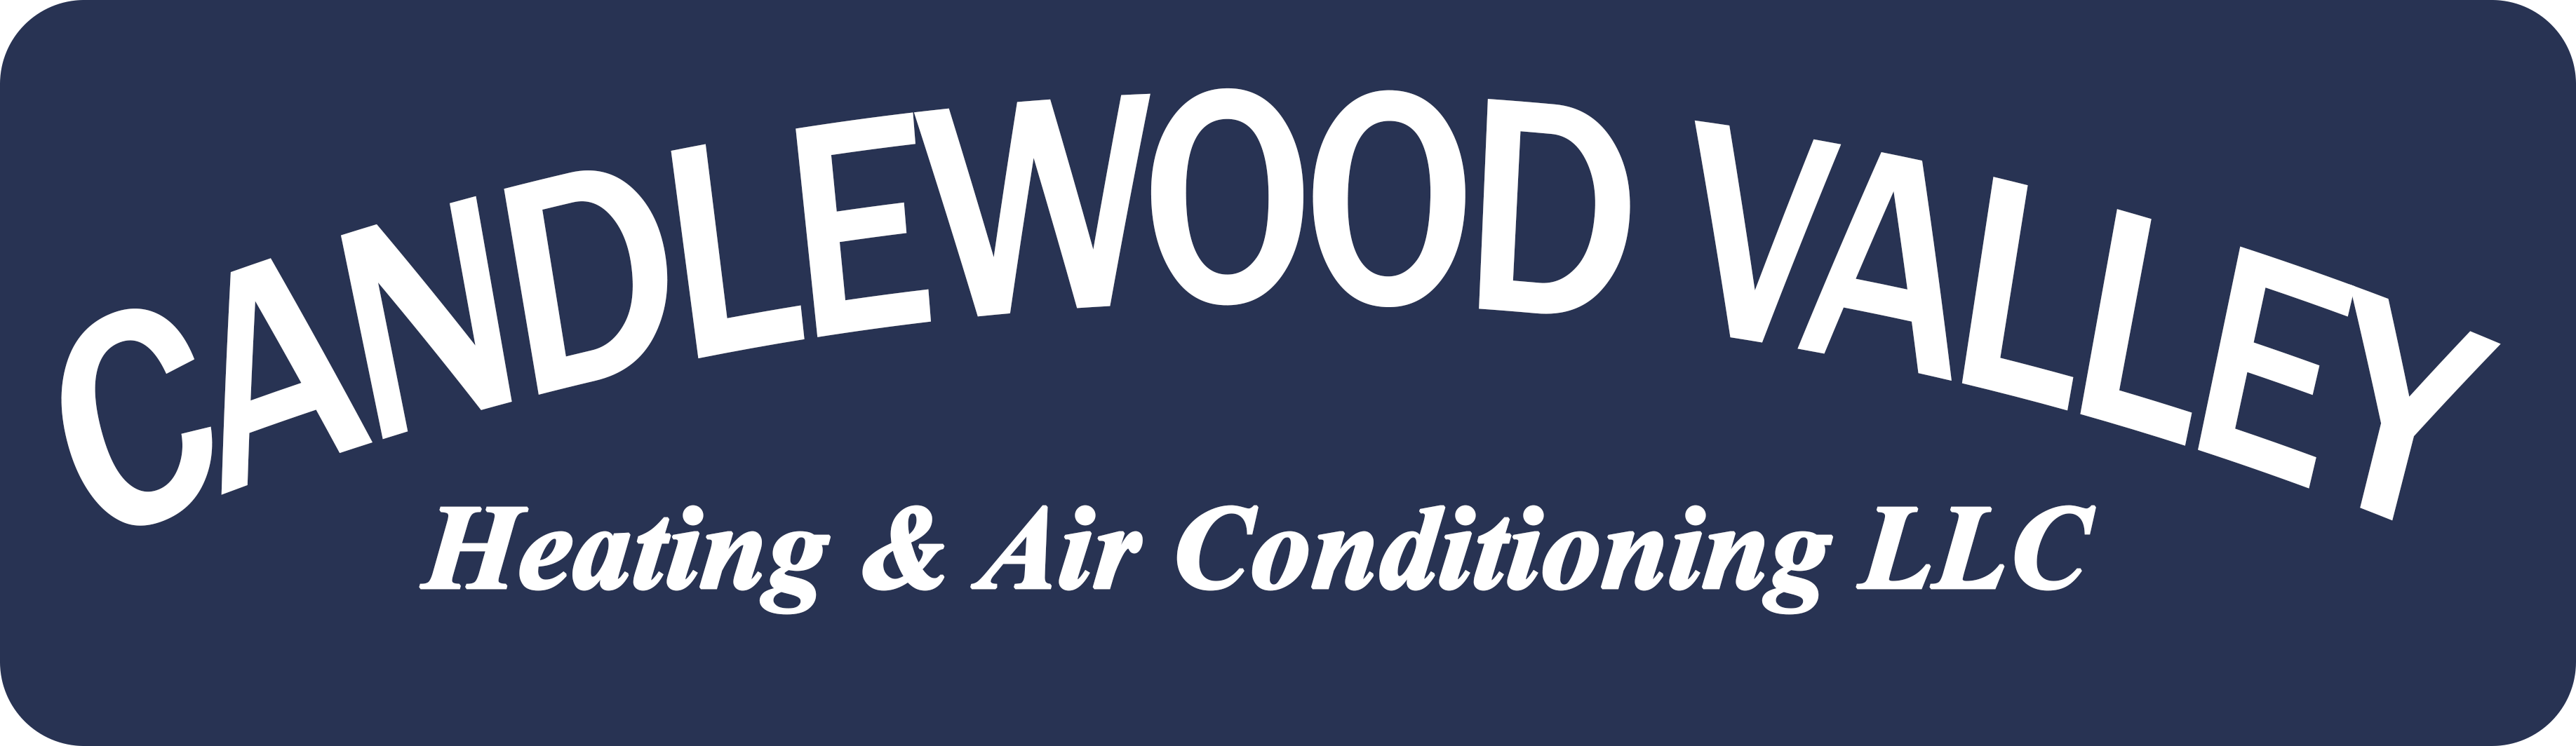 Candlewood Valley Heating & Air Conditioning, LLC